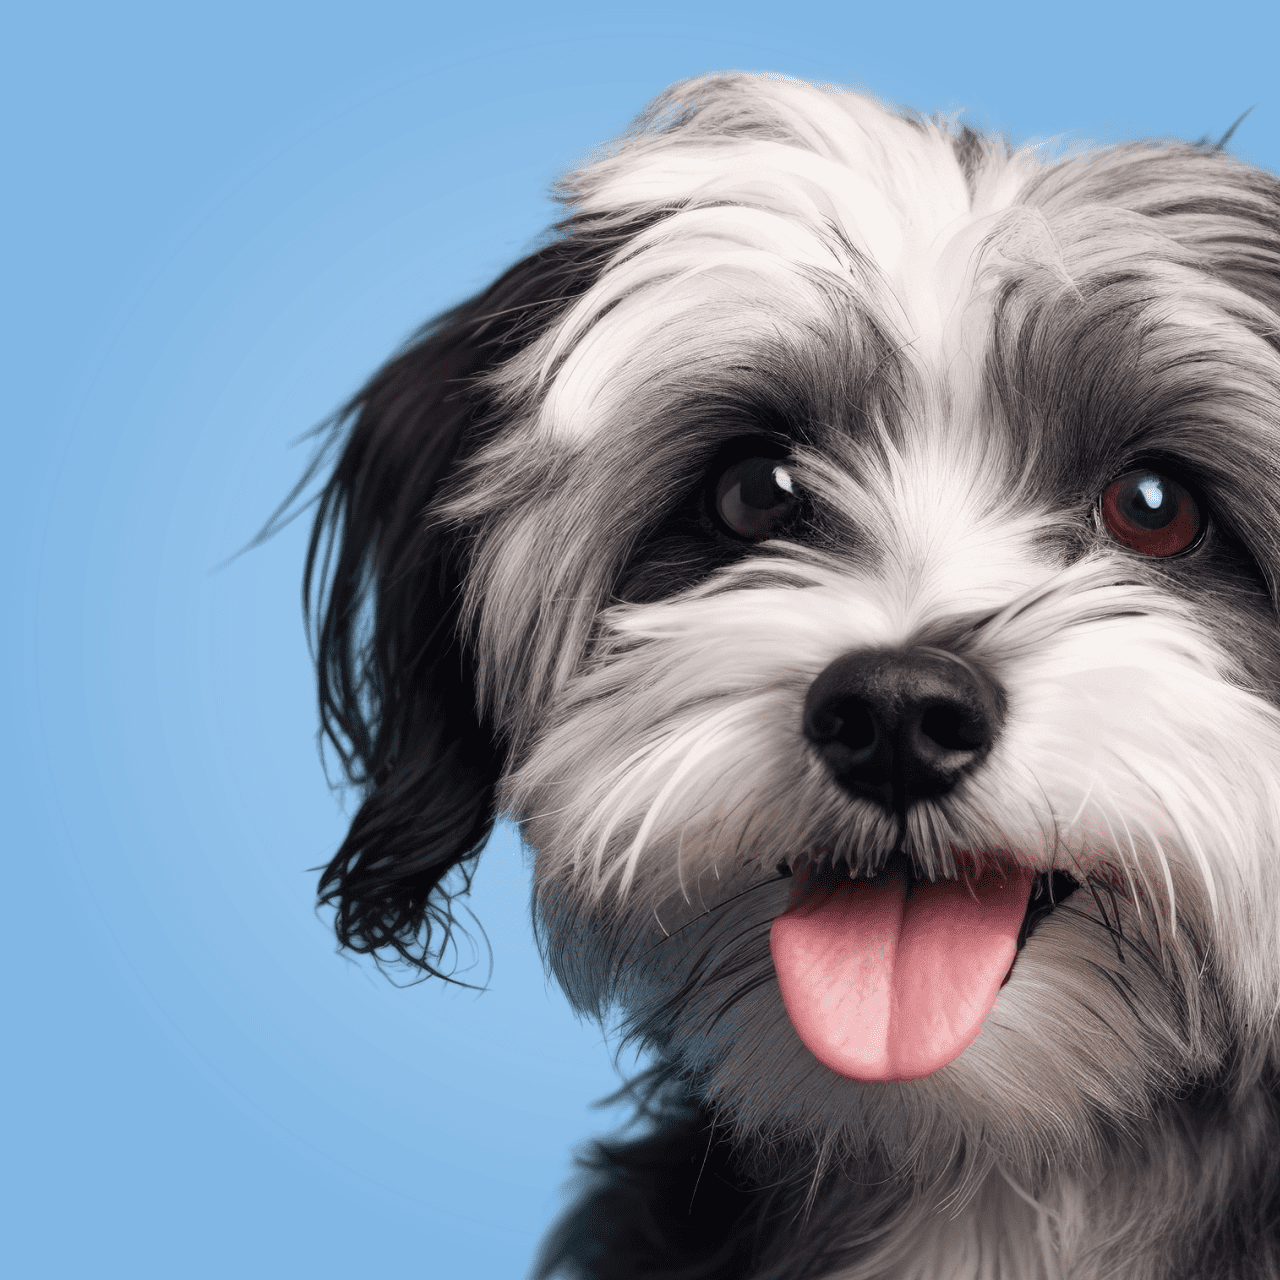 10 in 1 Multivitamin for Dogs - 90 Soft Chews